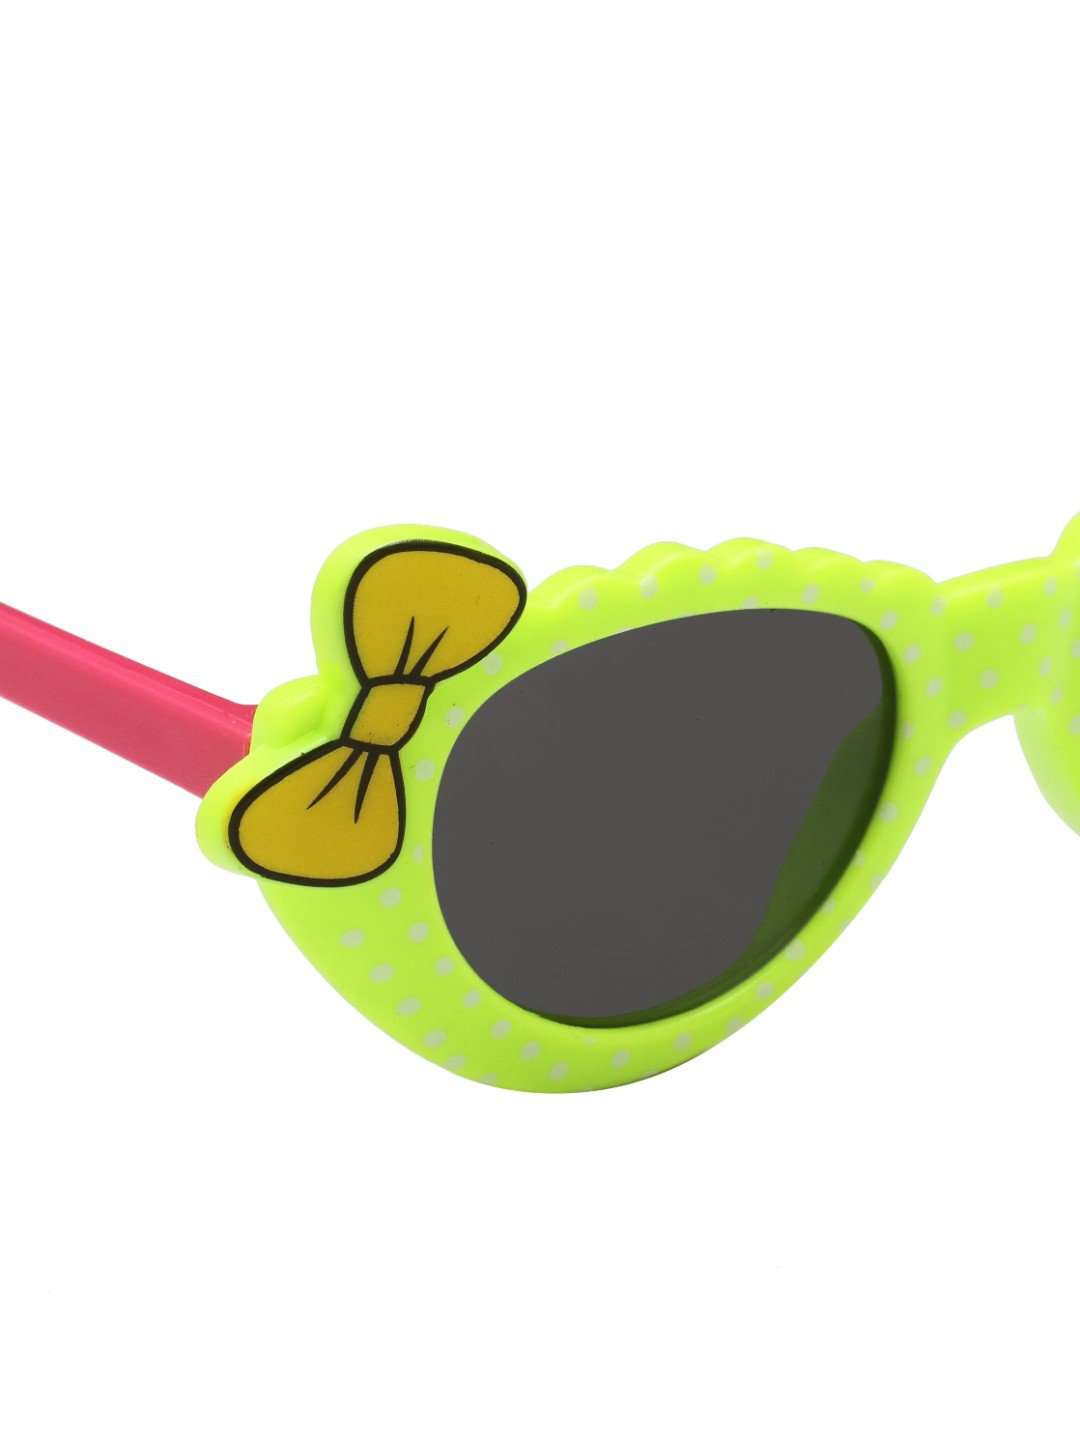 Stol'n Kids Green and Pink Bow Cate Eye Sunglasses - SWHF